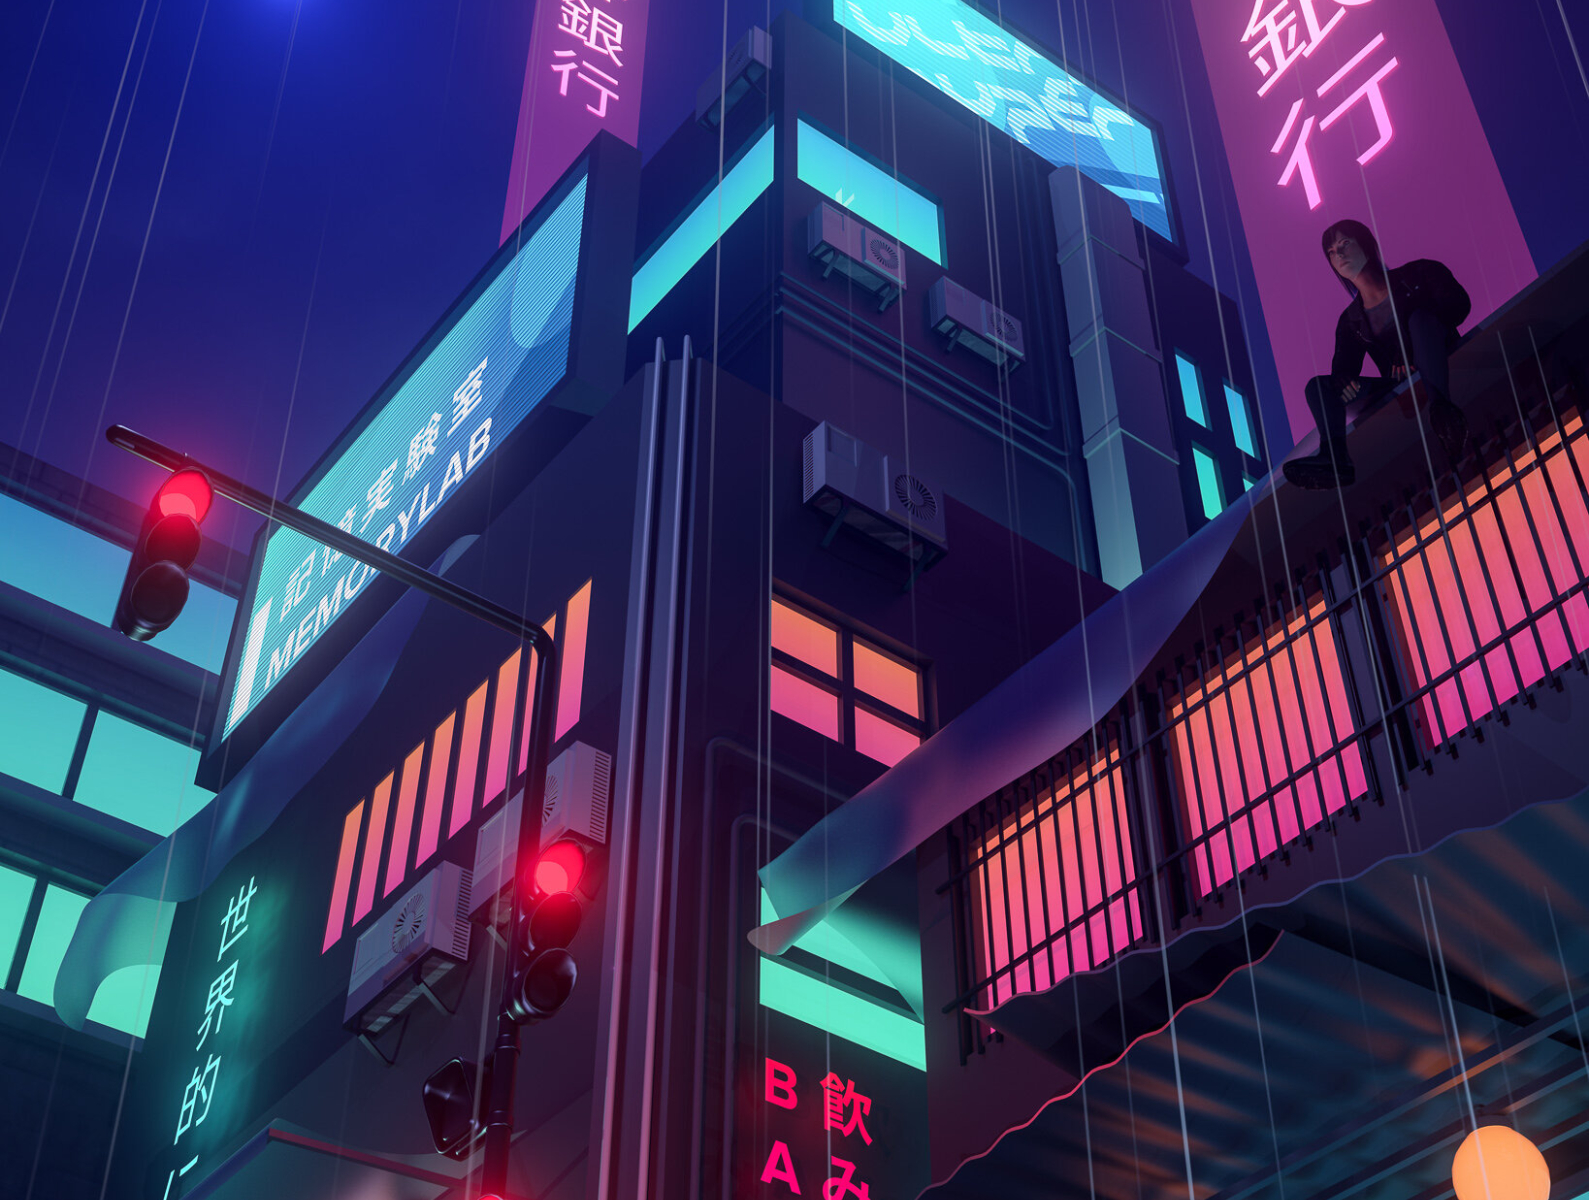 Page 2 | Anime City Wallpaper Images - Free Download on Freepik